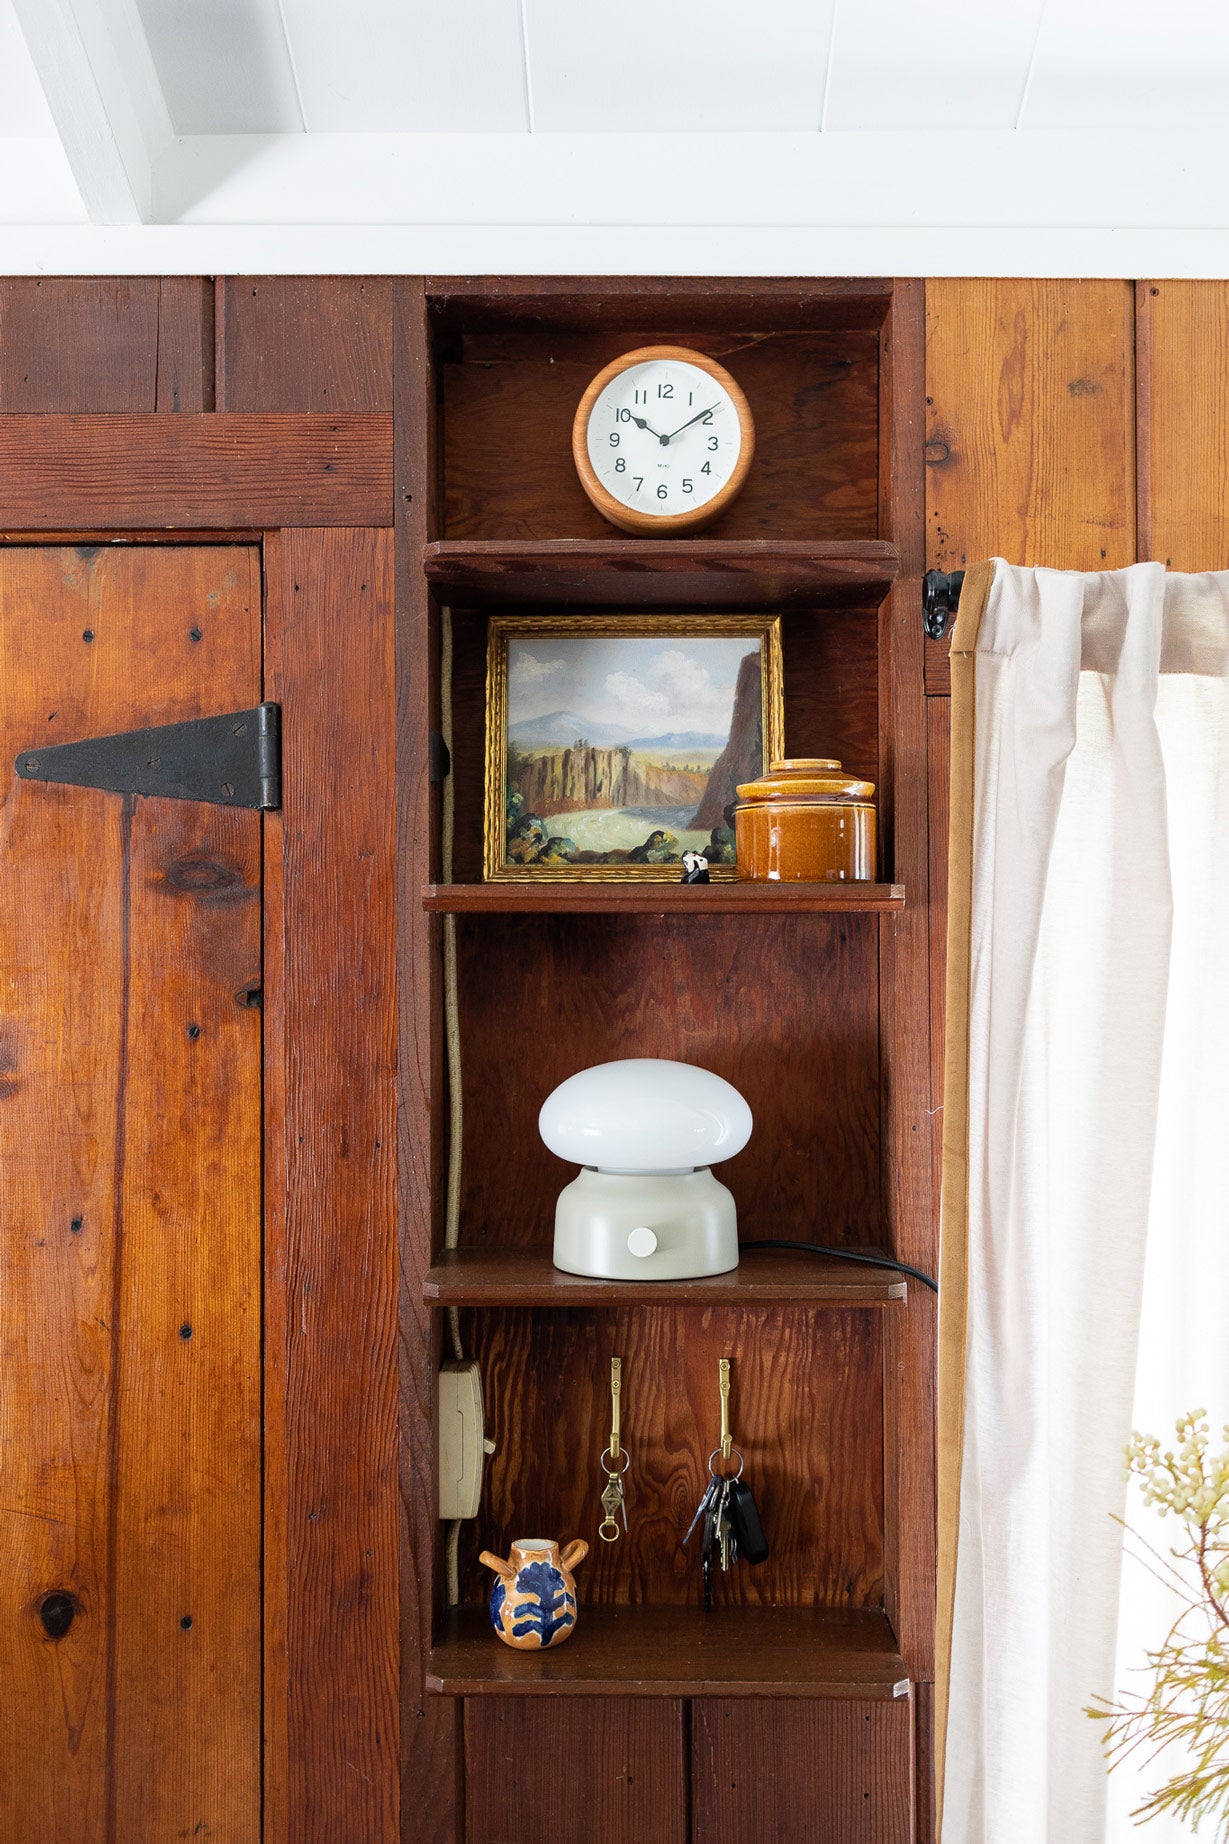 Moody built in cabinet by front door with small wooden clock, keys, modern lamp, and picture frame.